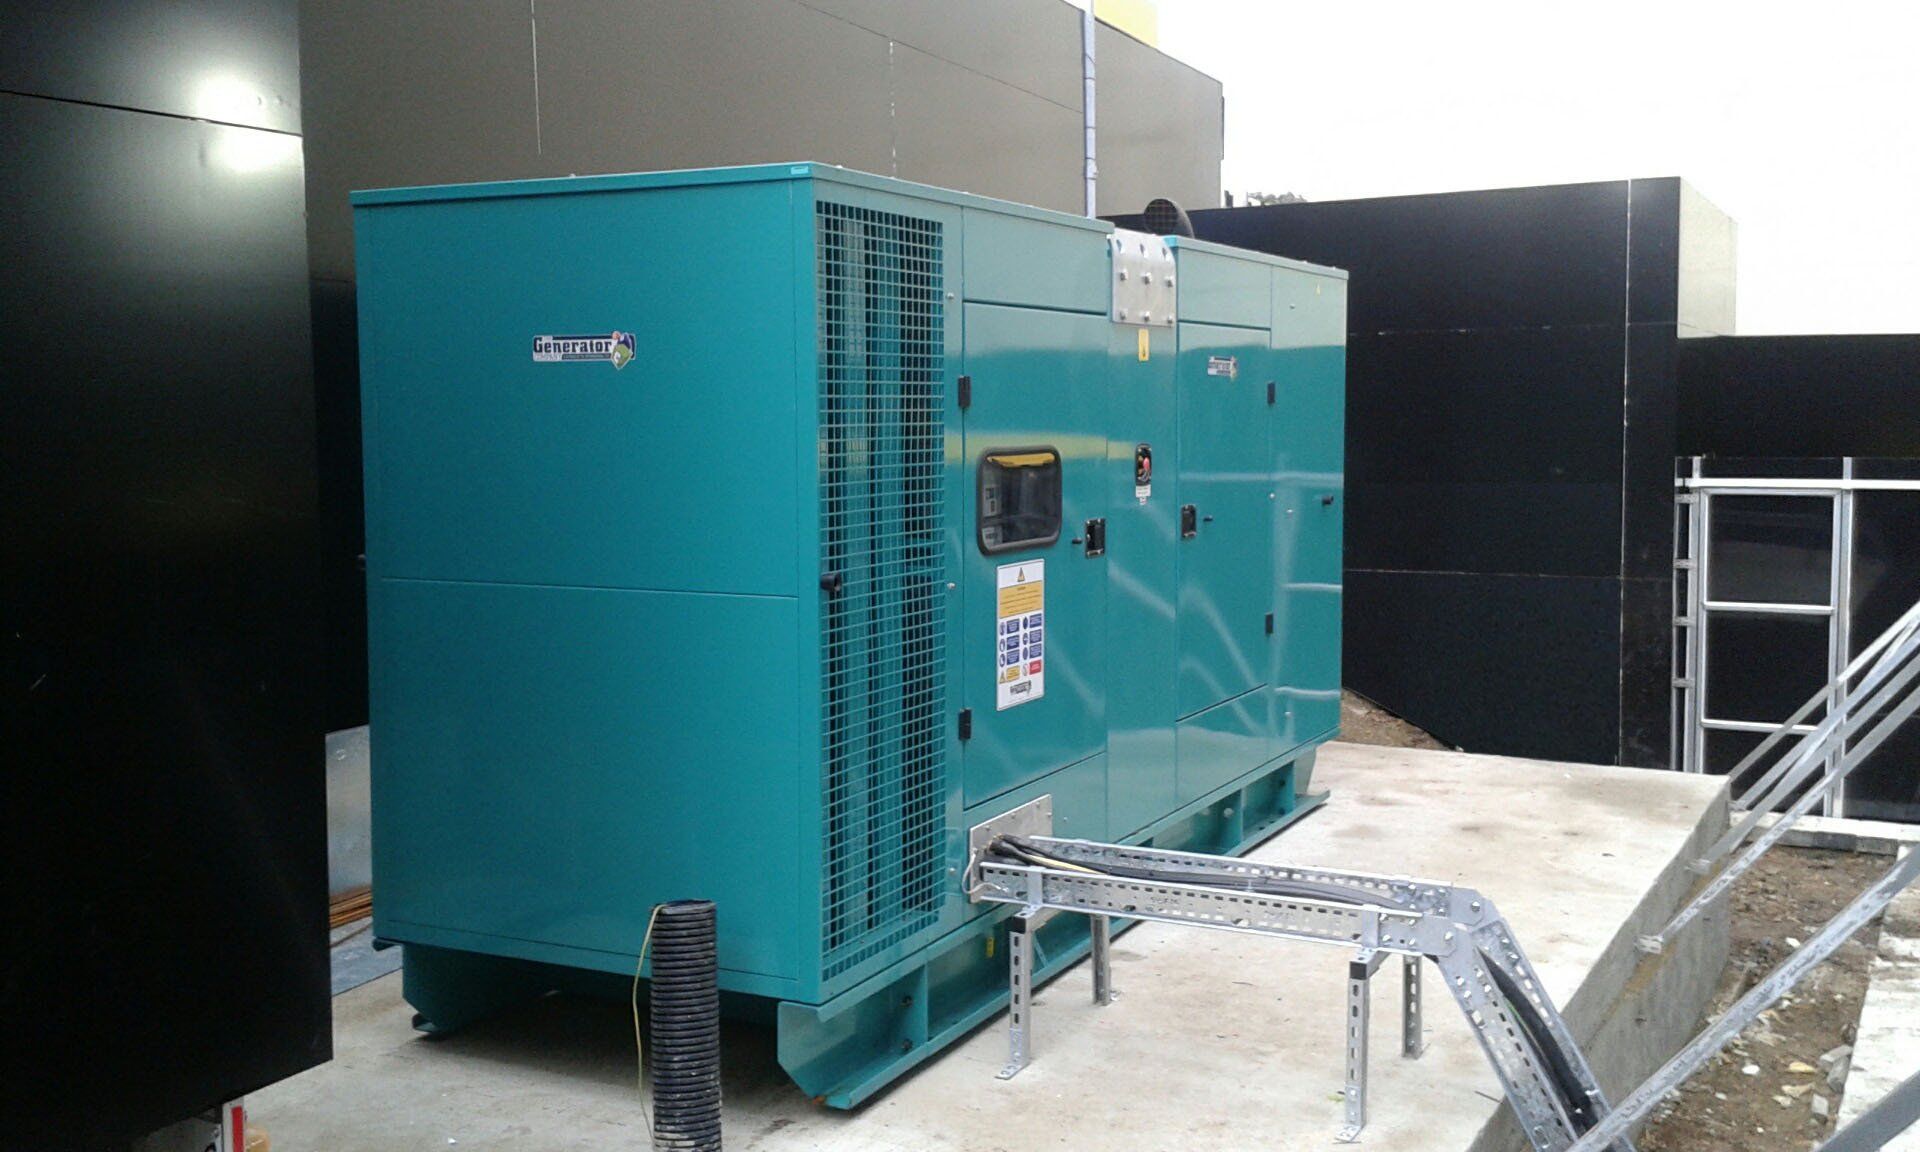 Mobile diesel generator outdoors, ready for emergency electric power use.